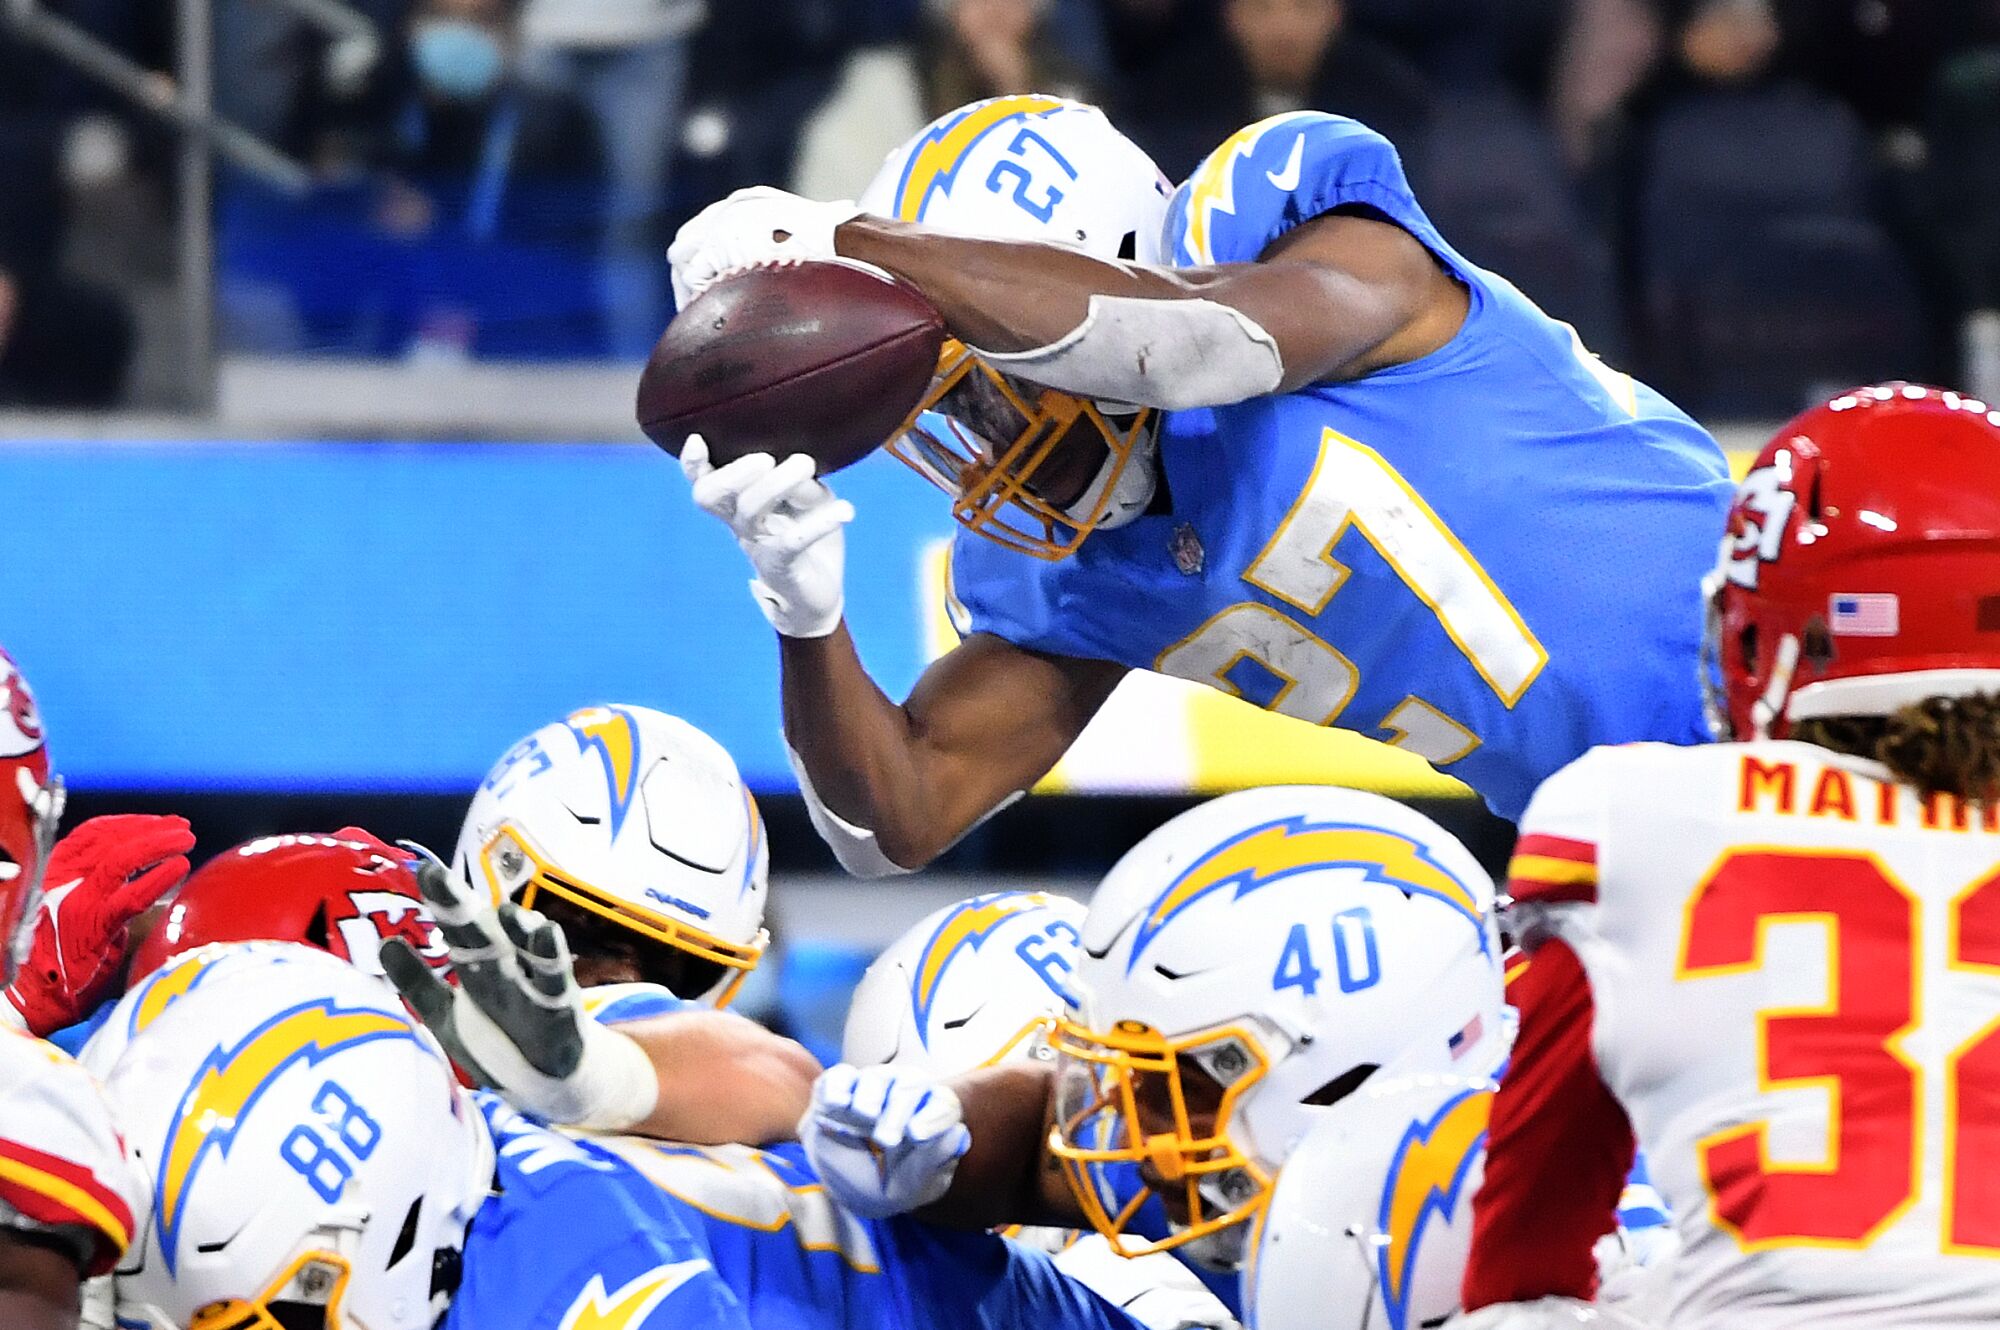 Chargers running back Joshua Kelley fumbles the football while trying to dive for a touchdown.